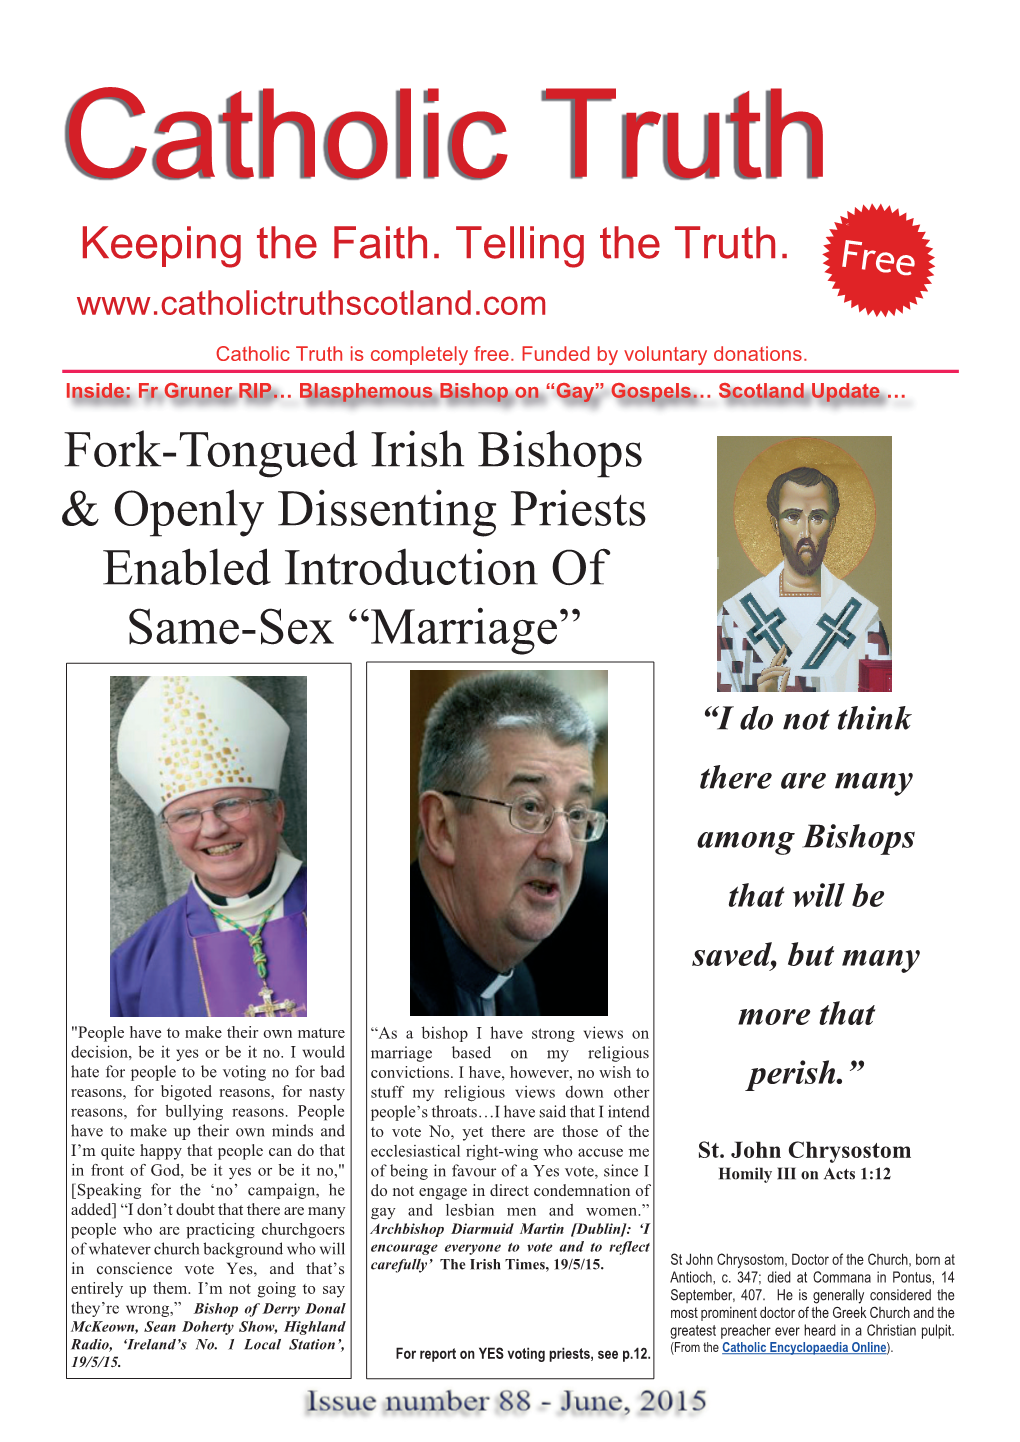 Fork-Tongued Irish Bishops & Openly Dissenting Priests Enabled